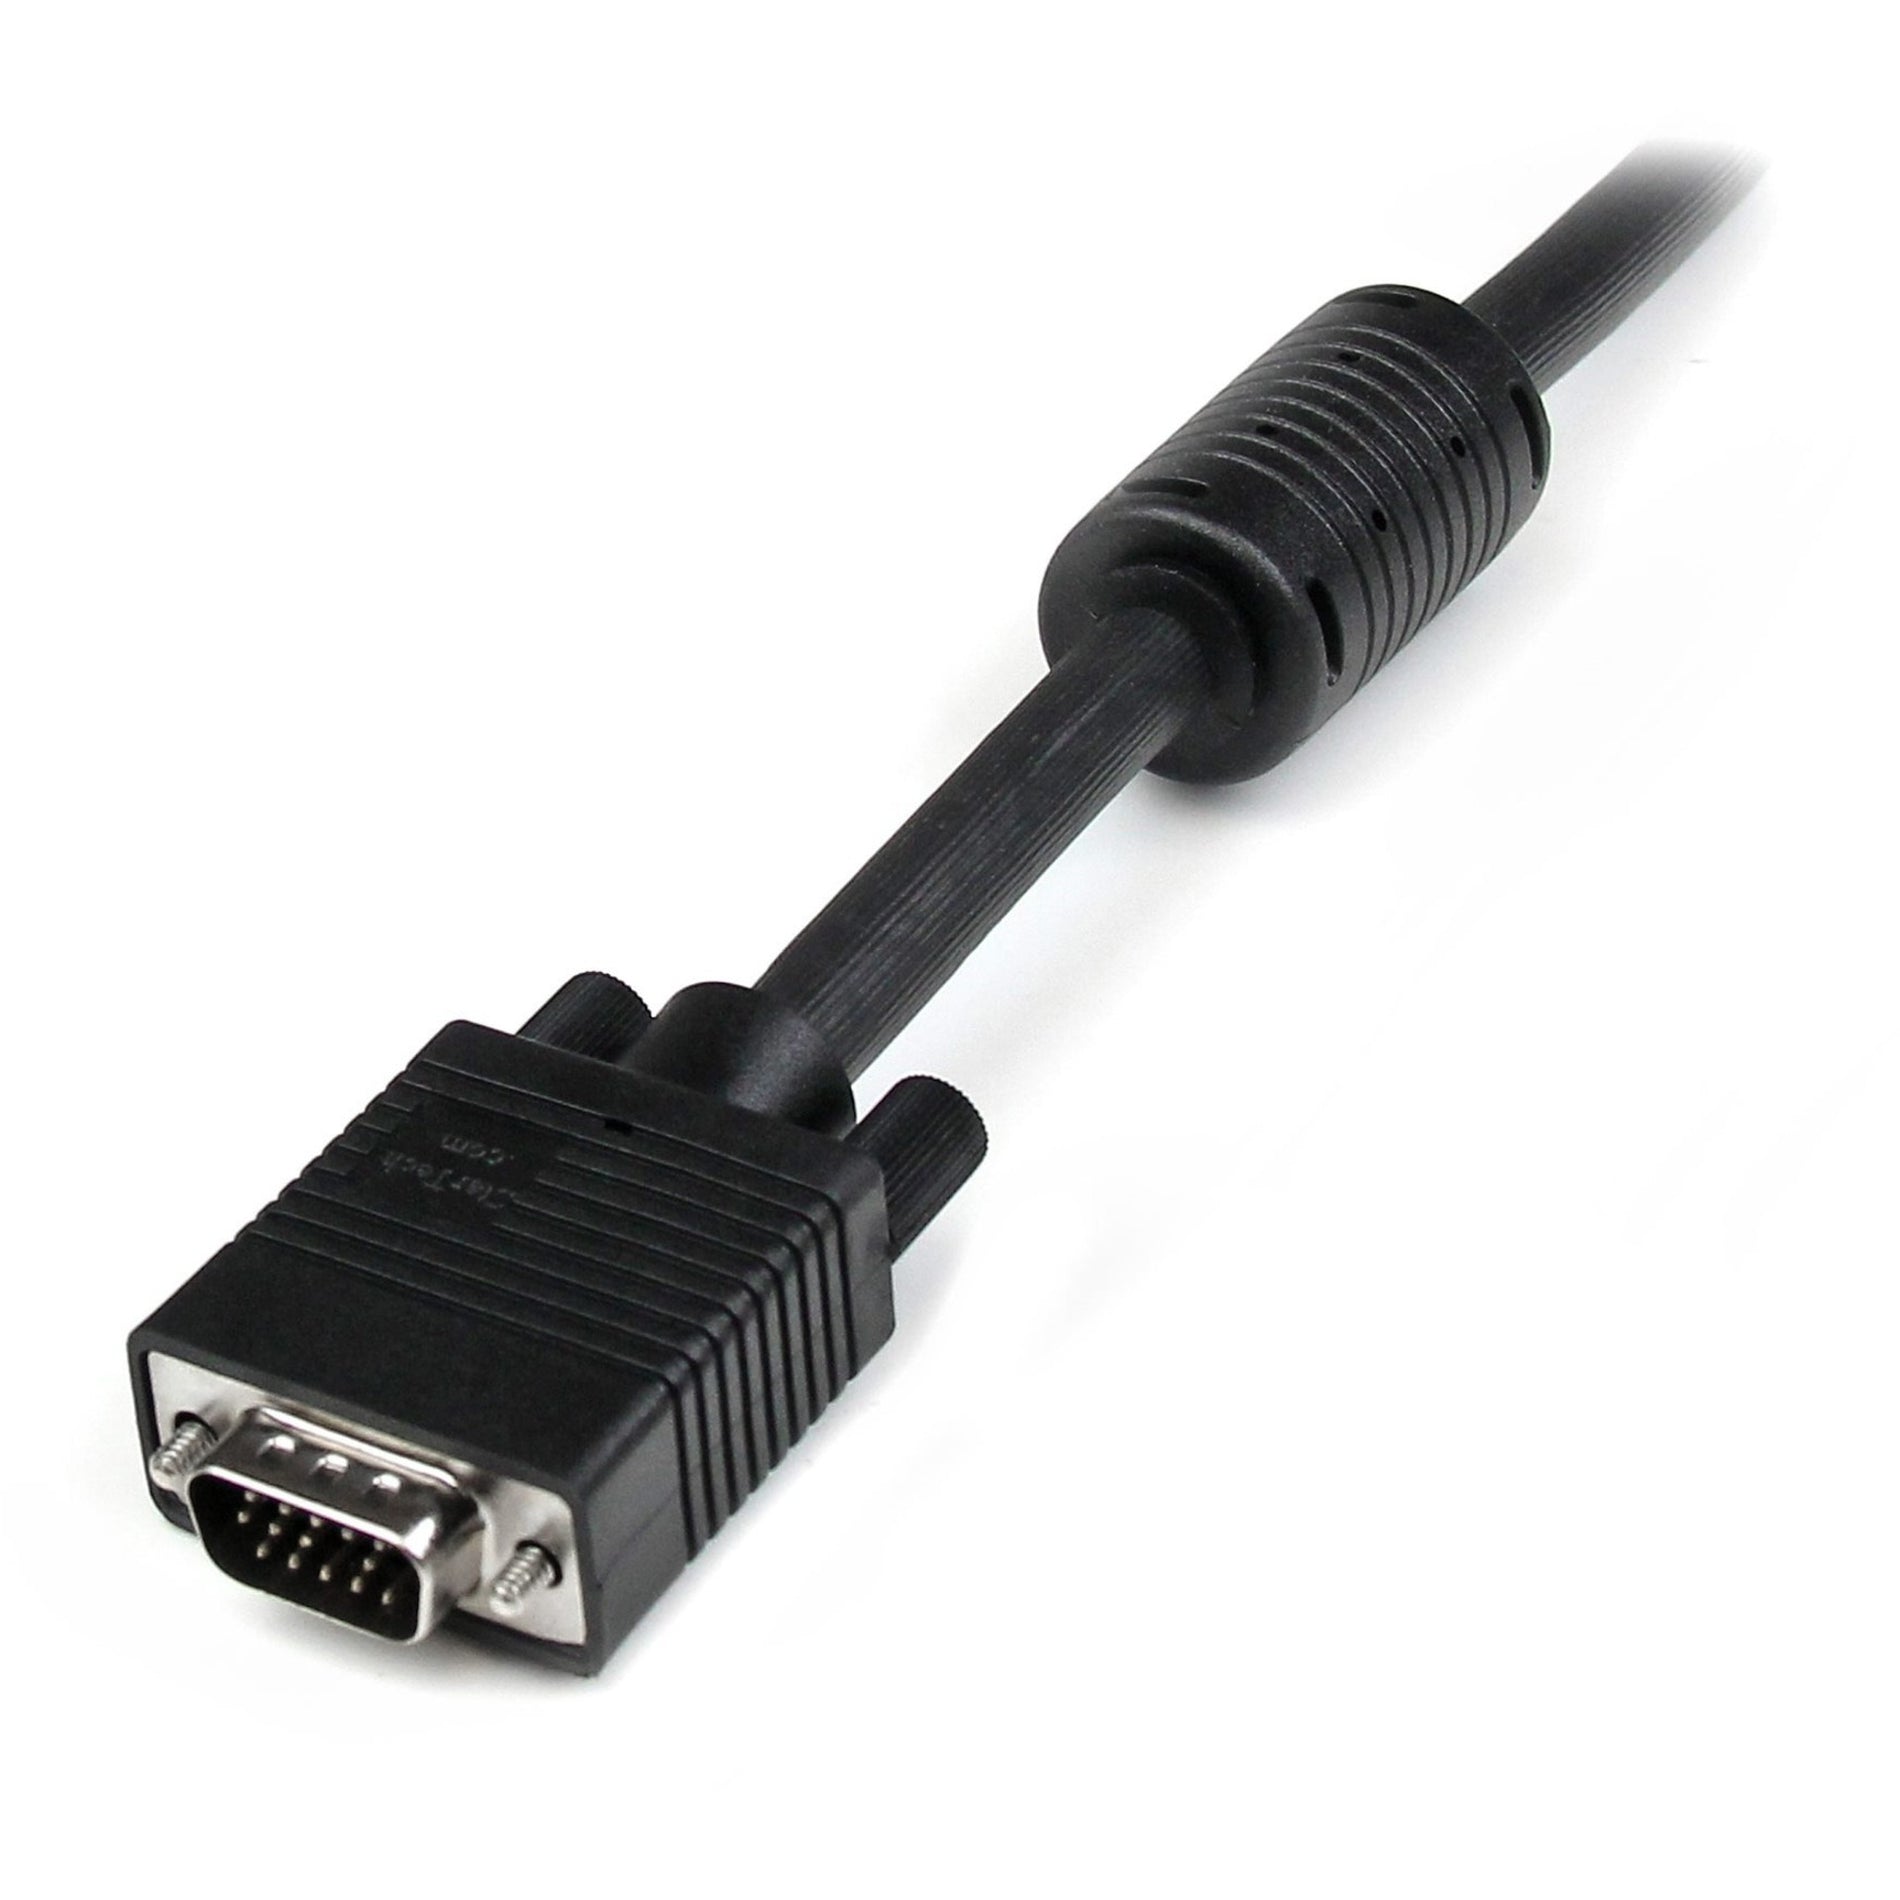 StarTech.com MXT101MMHQ High-Resolution Coaxial SVGA/VGA Monitor Cable, Crystal Clear Display, 6 ft